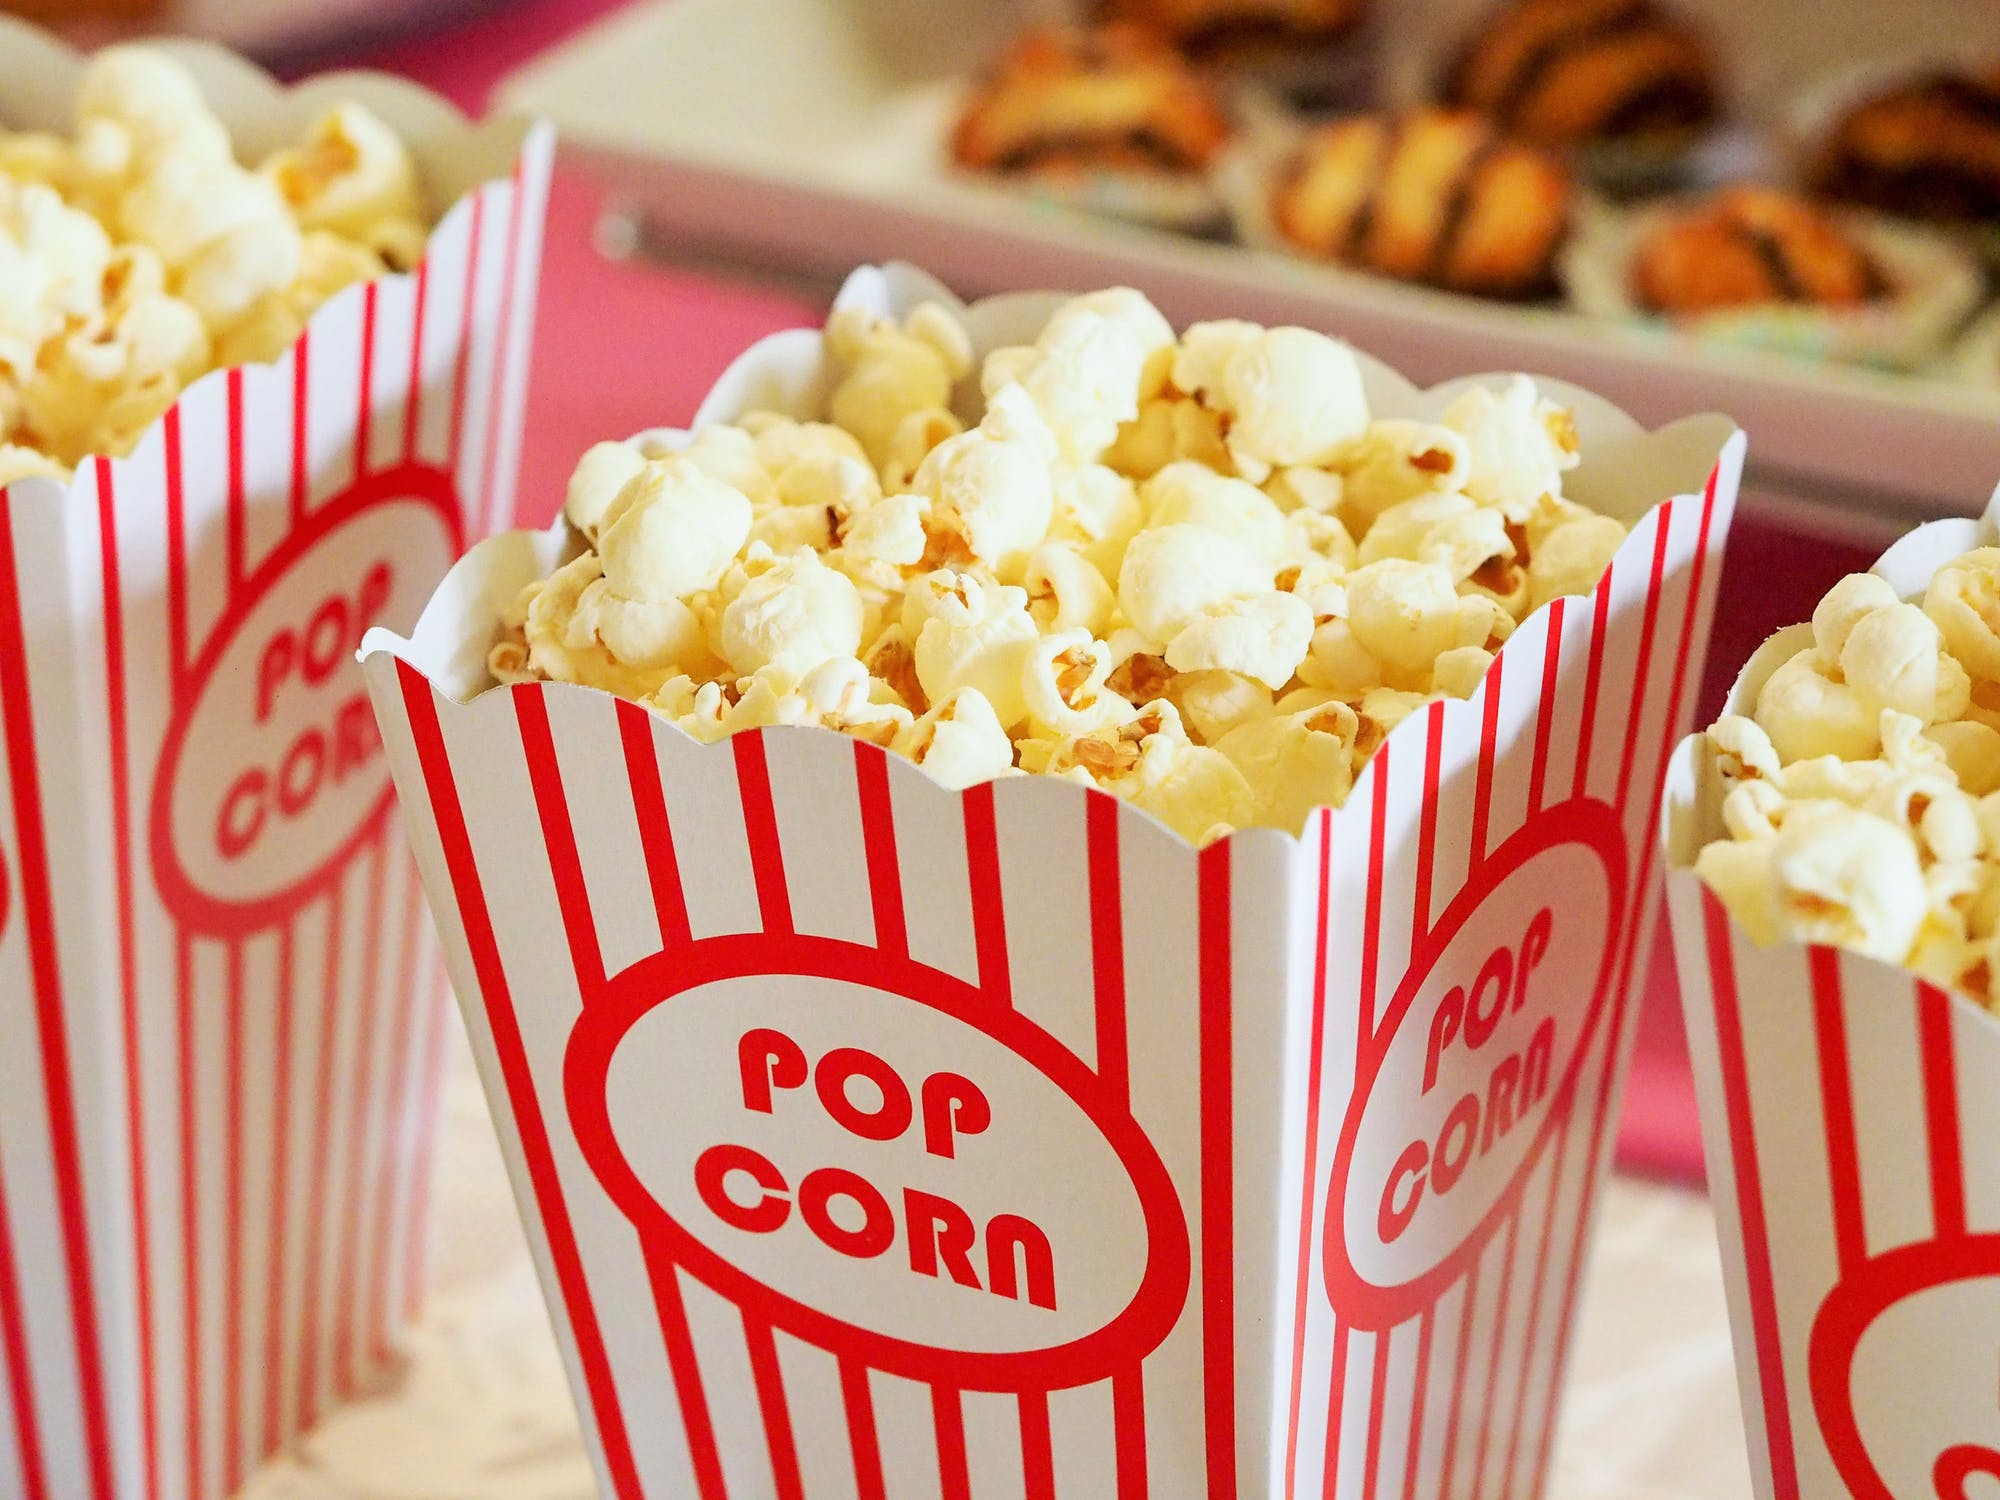 movie theater popcorn, movies during covid, covid ticket sales